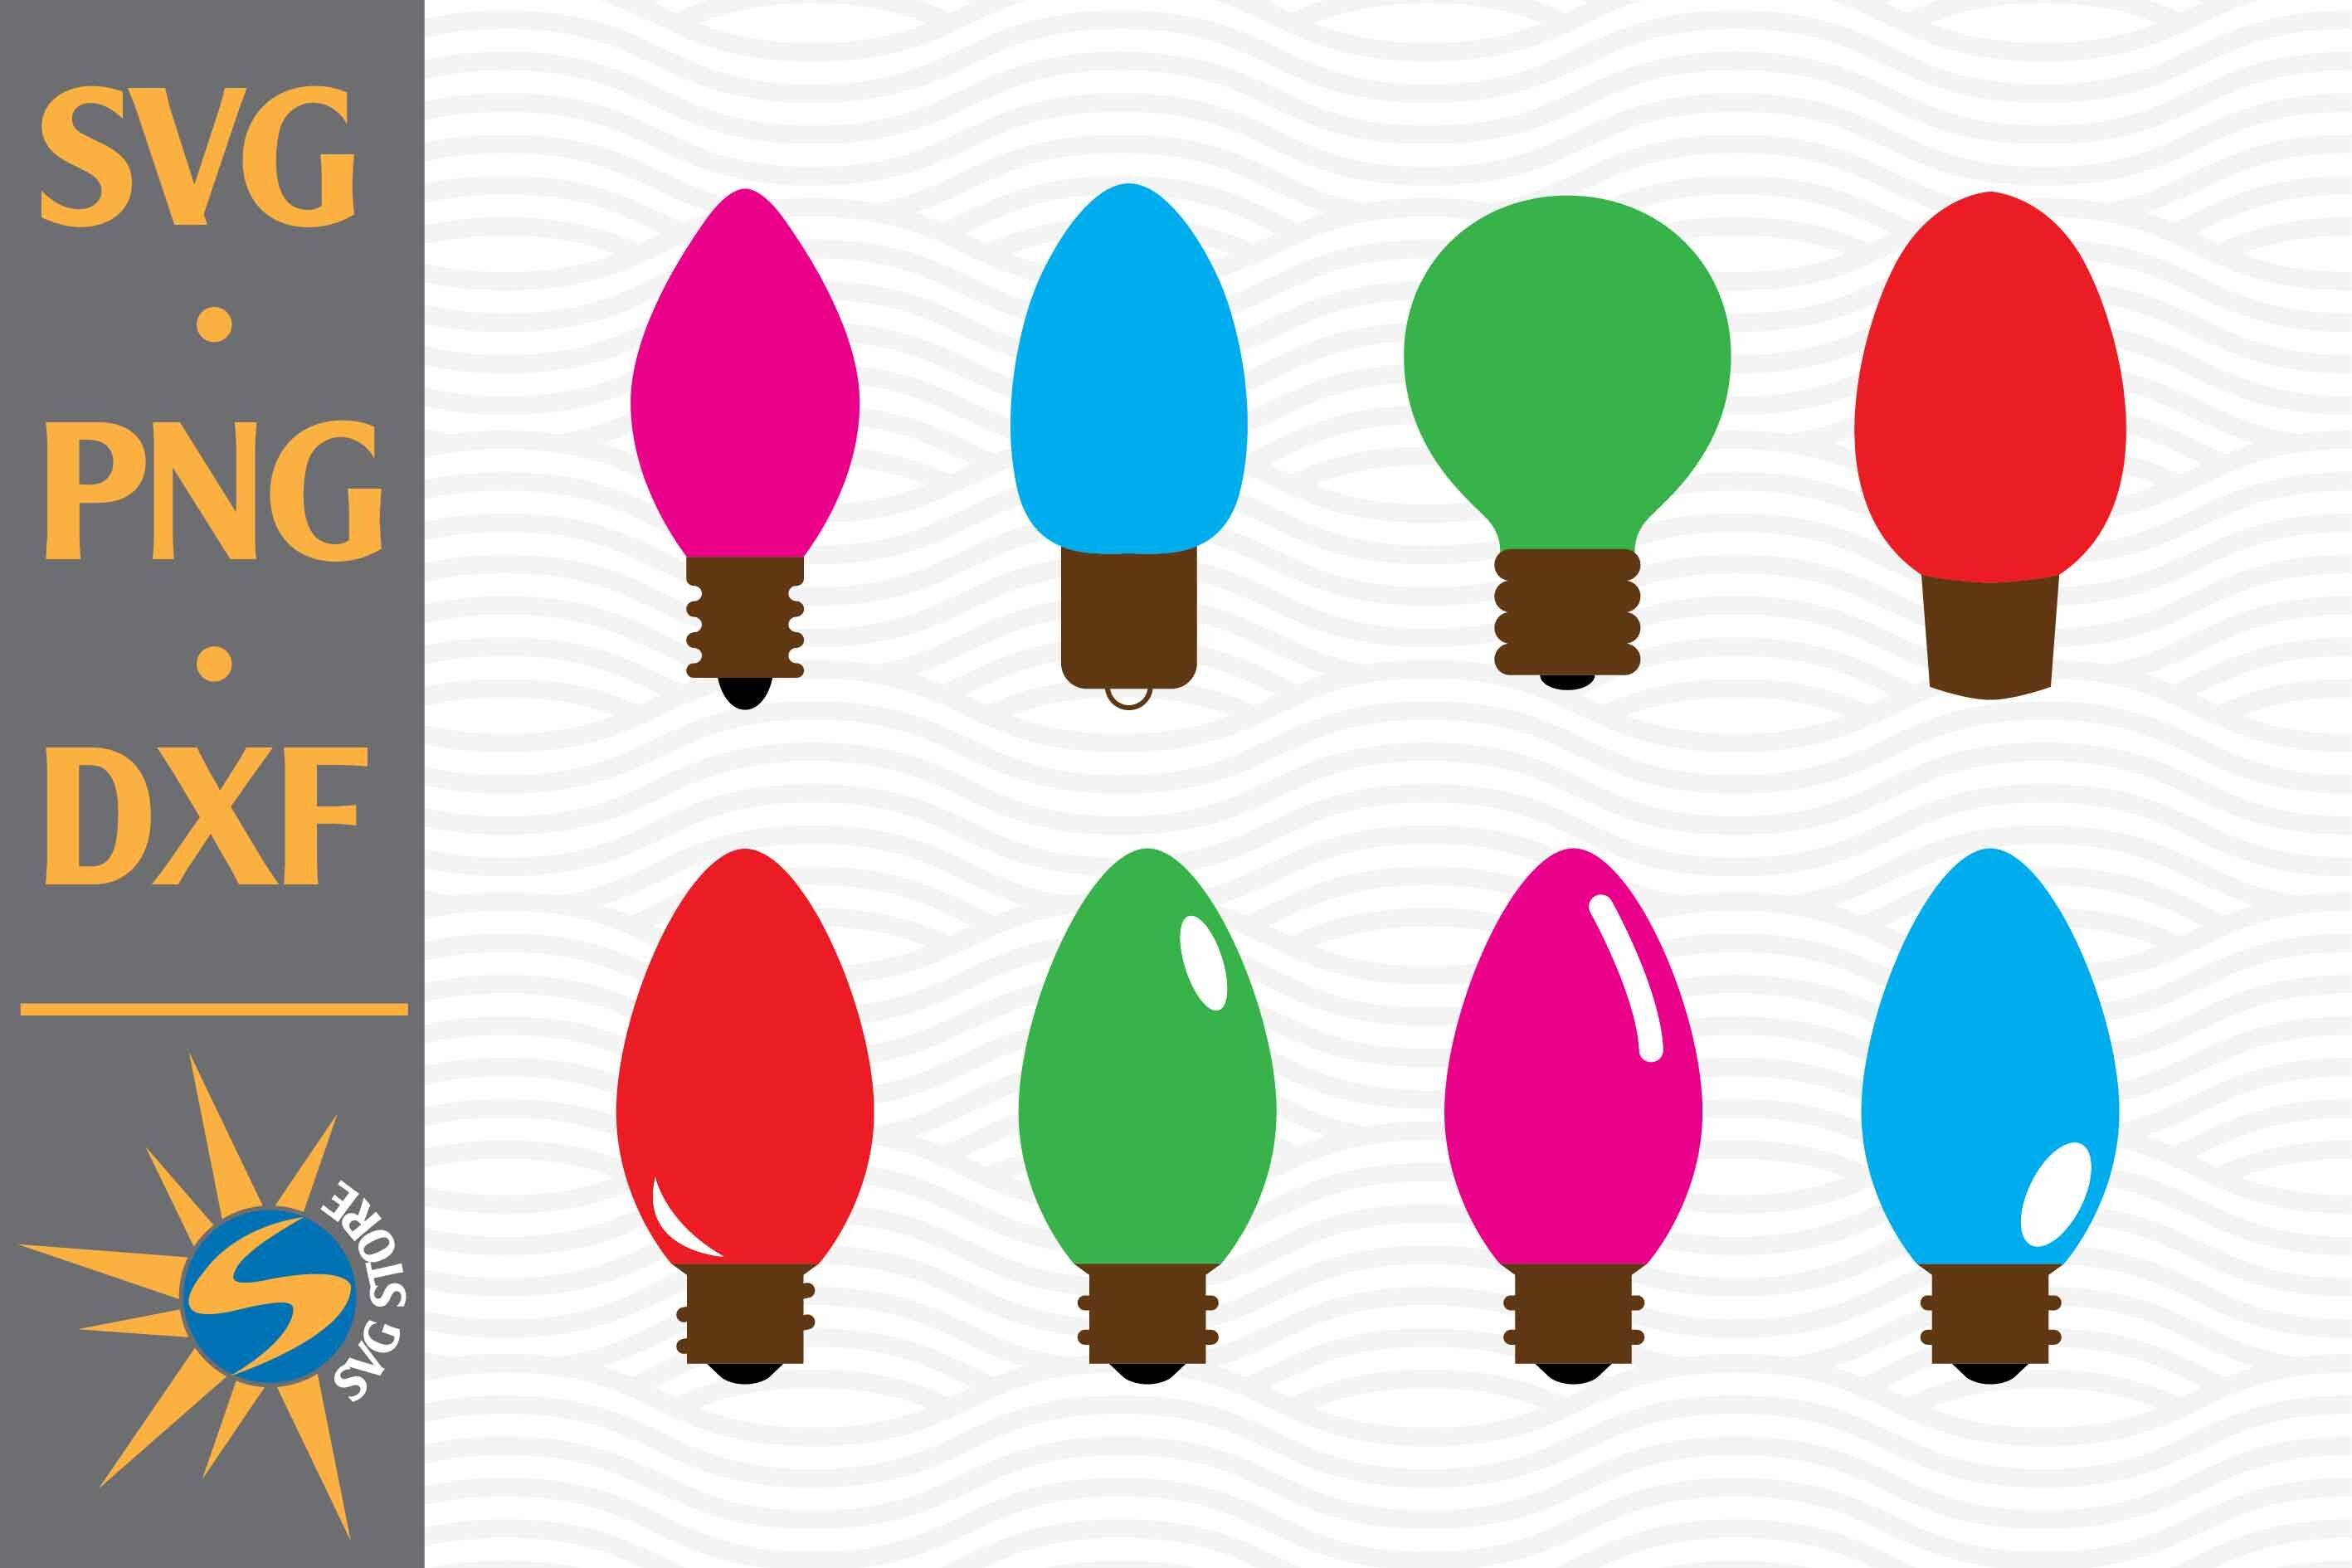 Christmas Light Bulb SVG, PNG, DXF Digital Files Include By